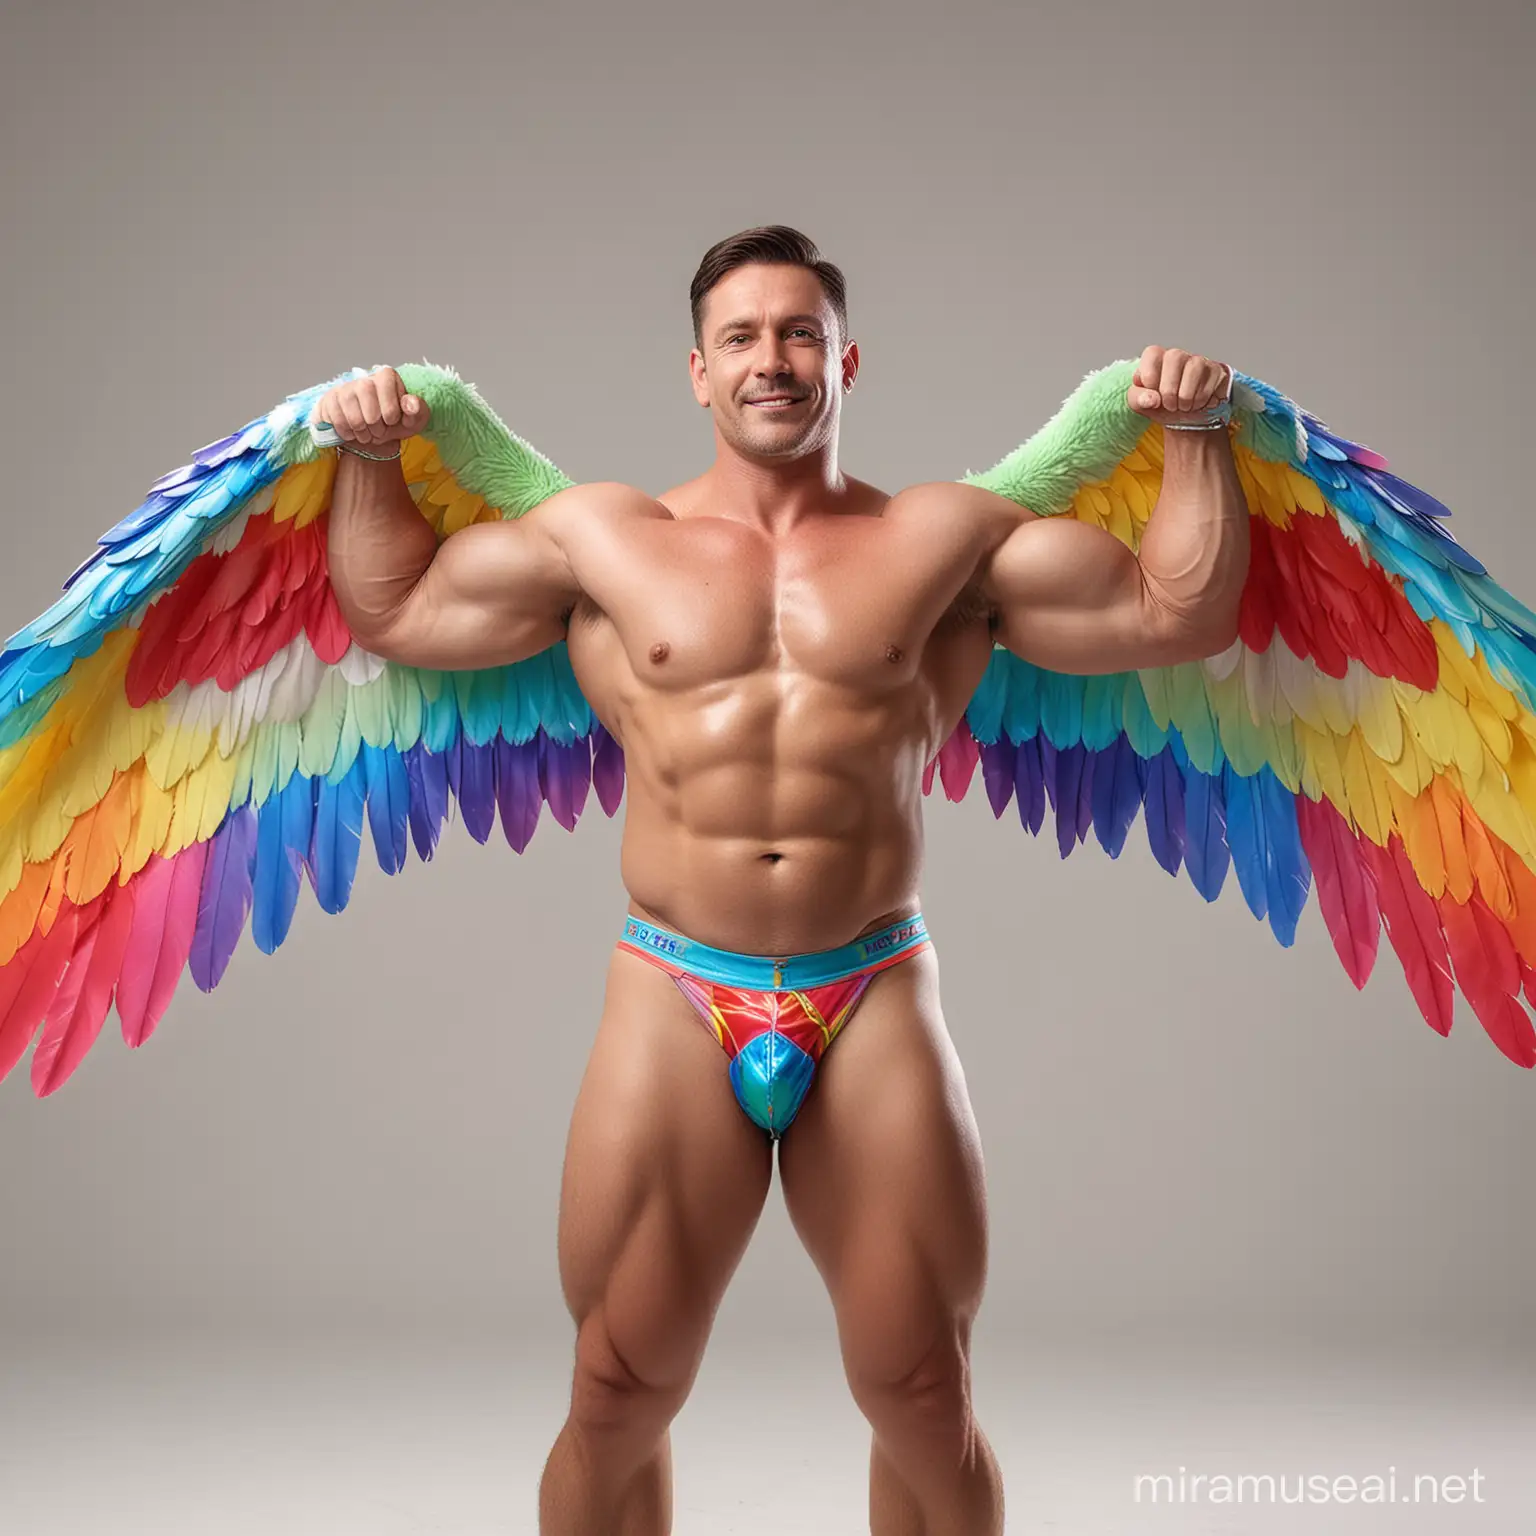 Ultra Chunky Bodybuilder Daddy Flexing in Rainbow Colored SeeThrough Eagle Wings Jacket